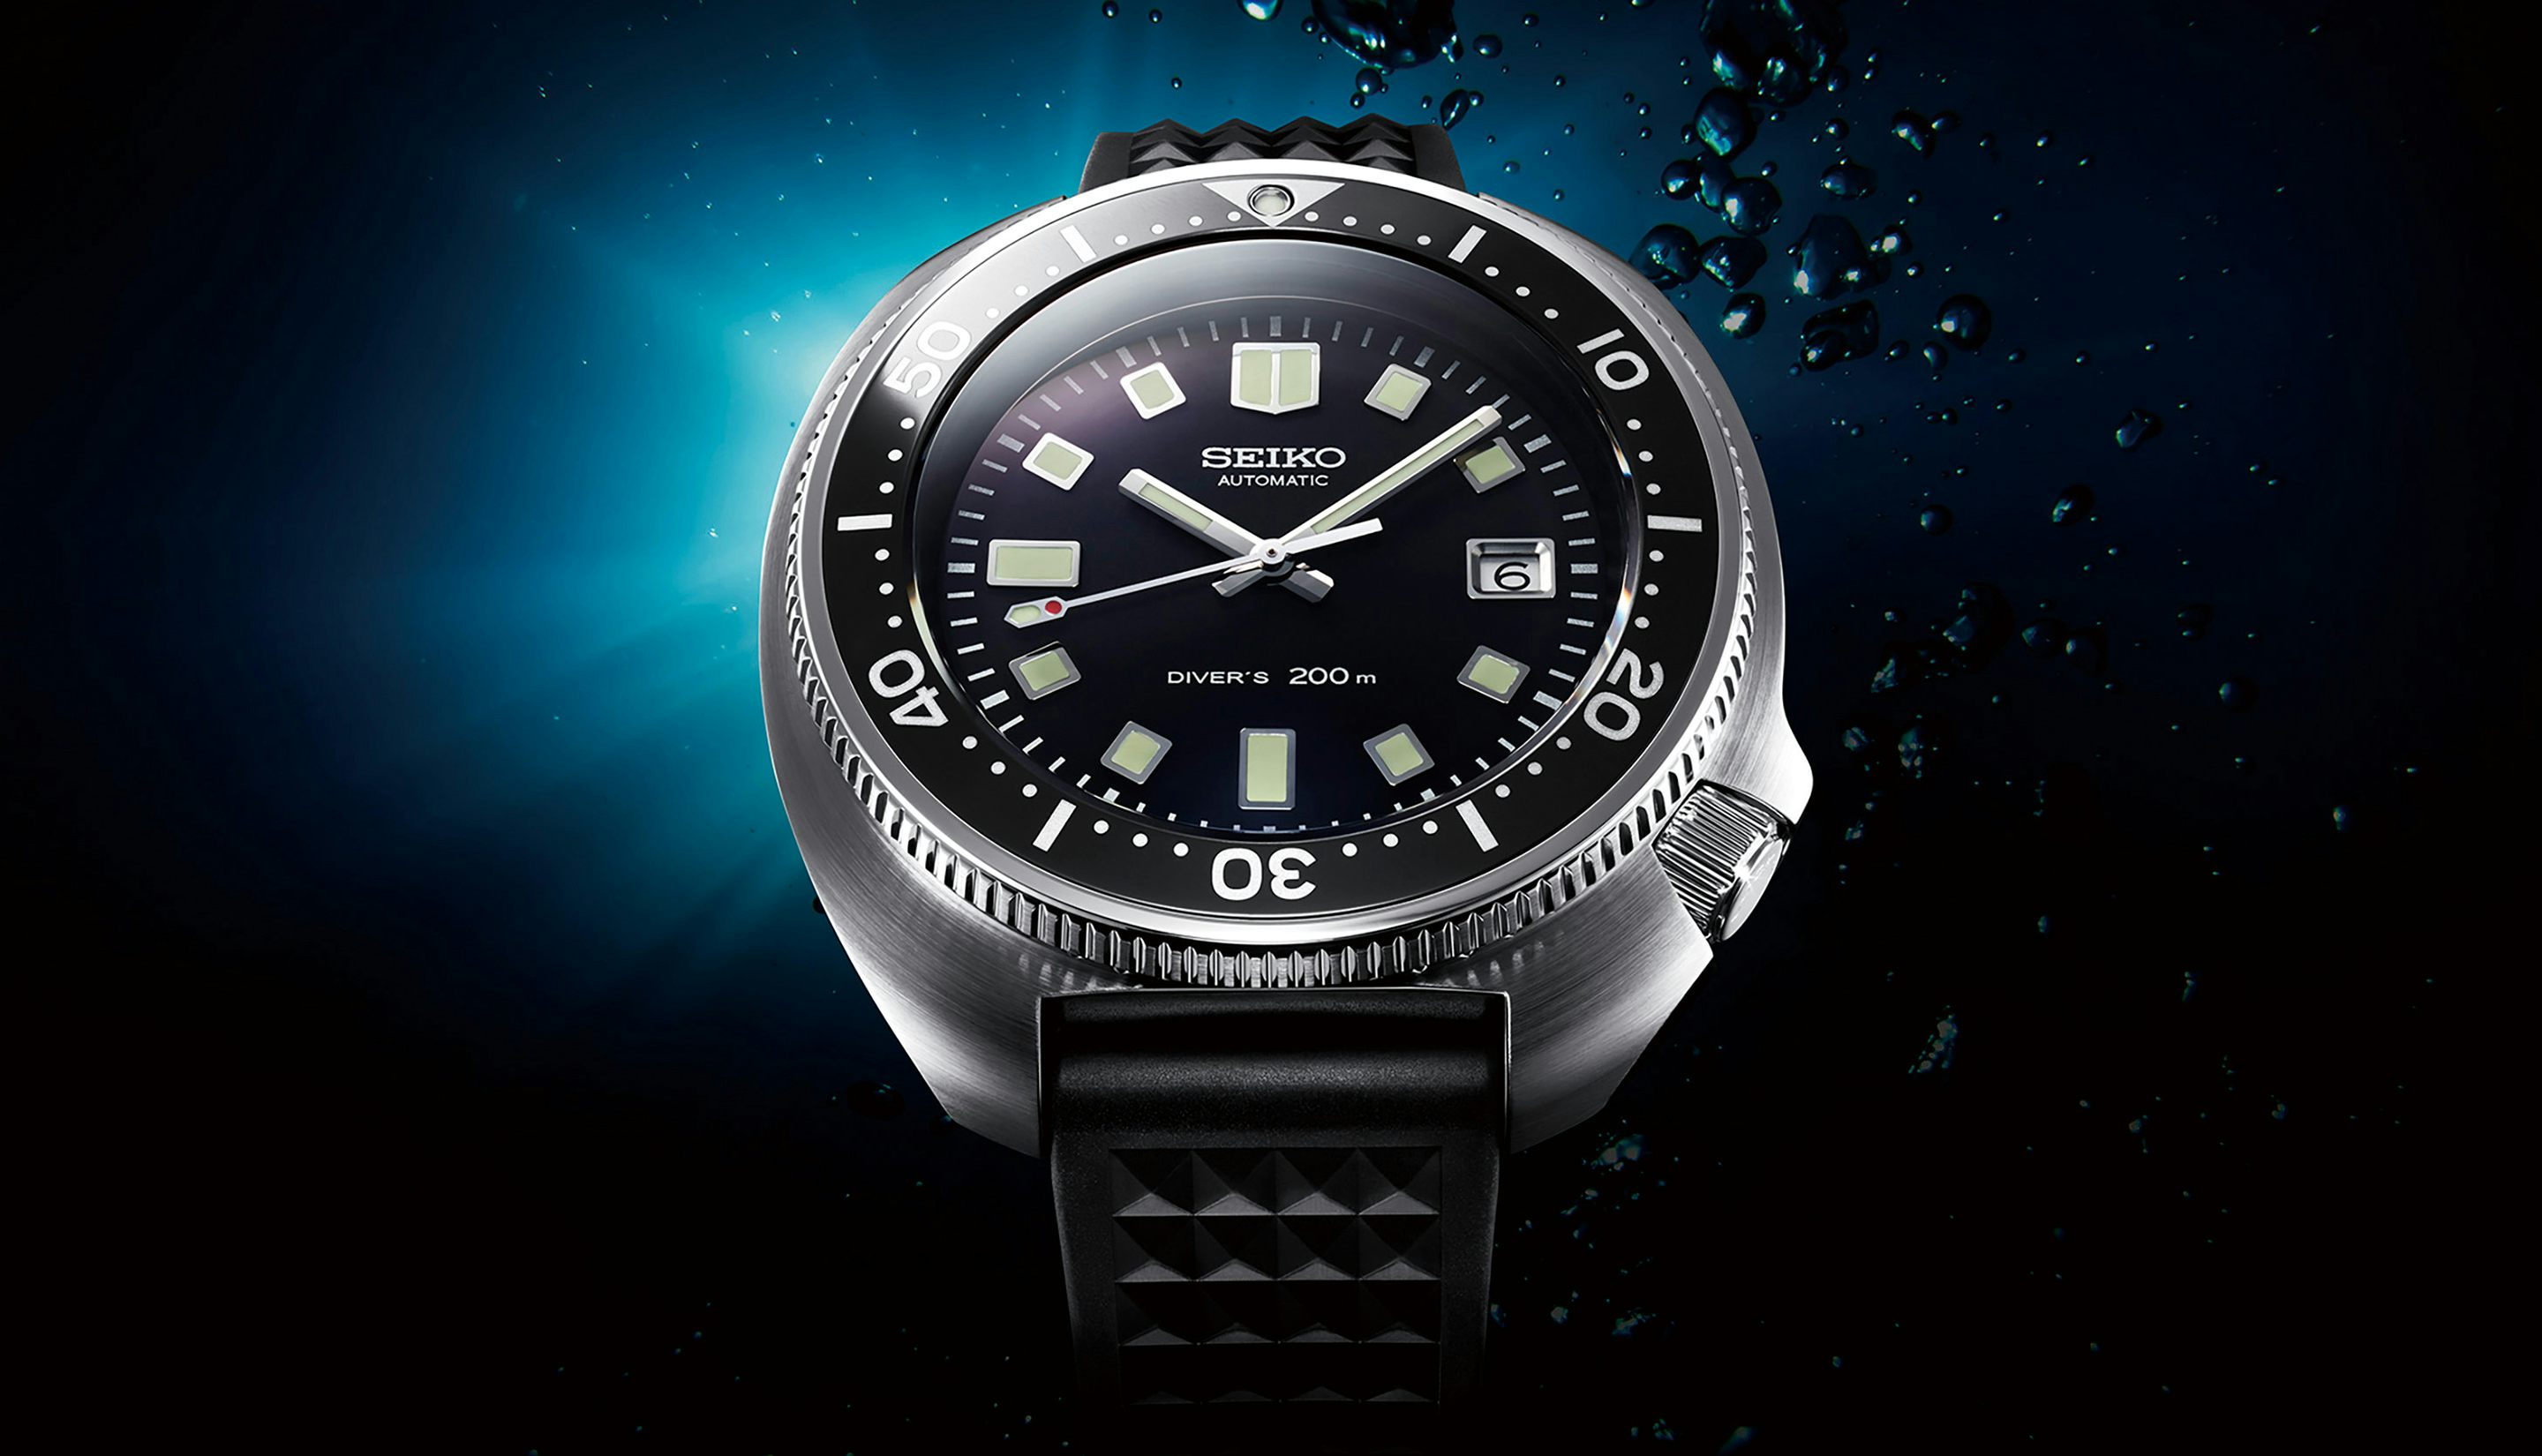 Introducing: The Seiko Prospex 1970 Diver's Re-Creation Limited Edition  SLA033 - Hodinkee